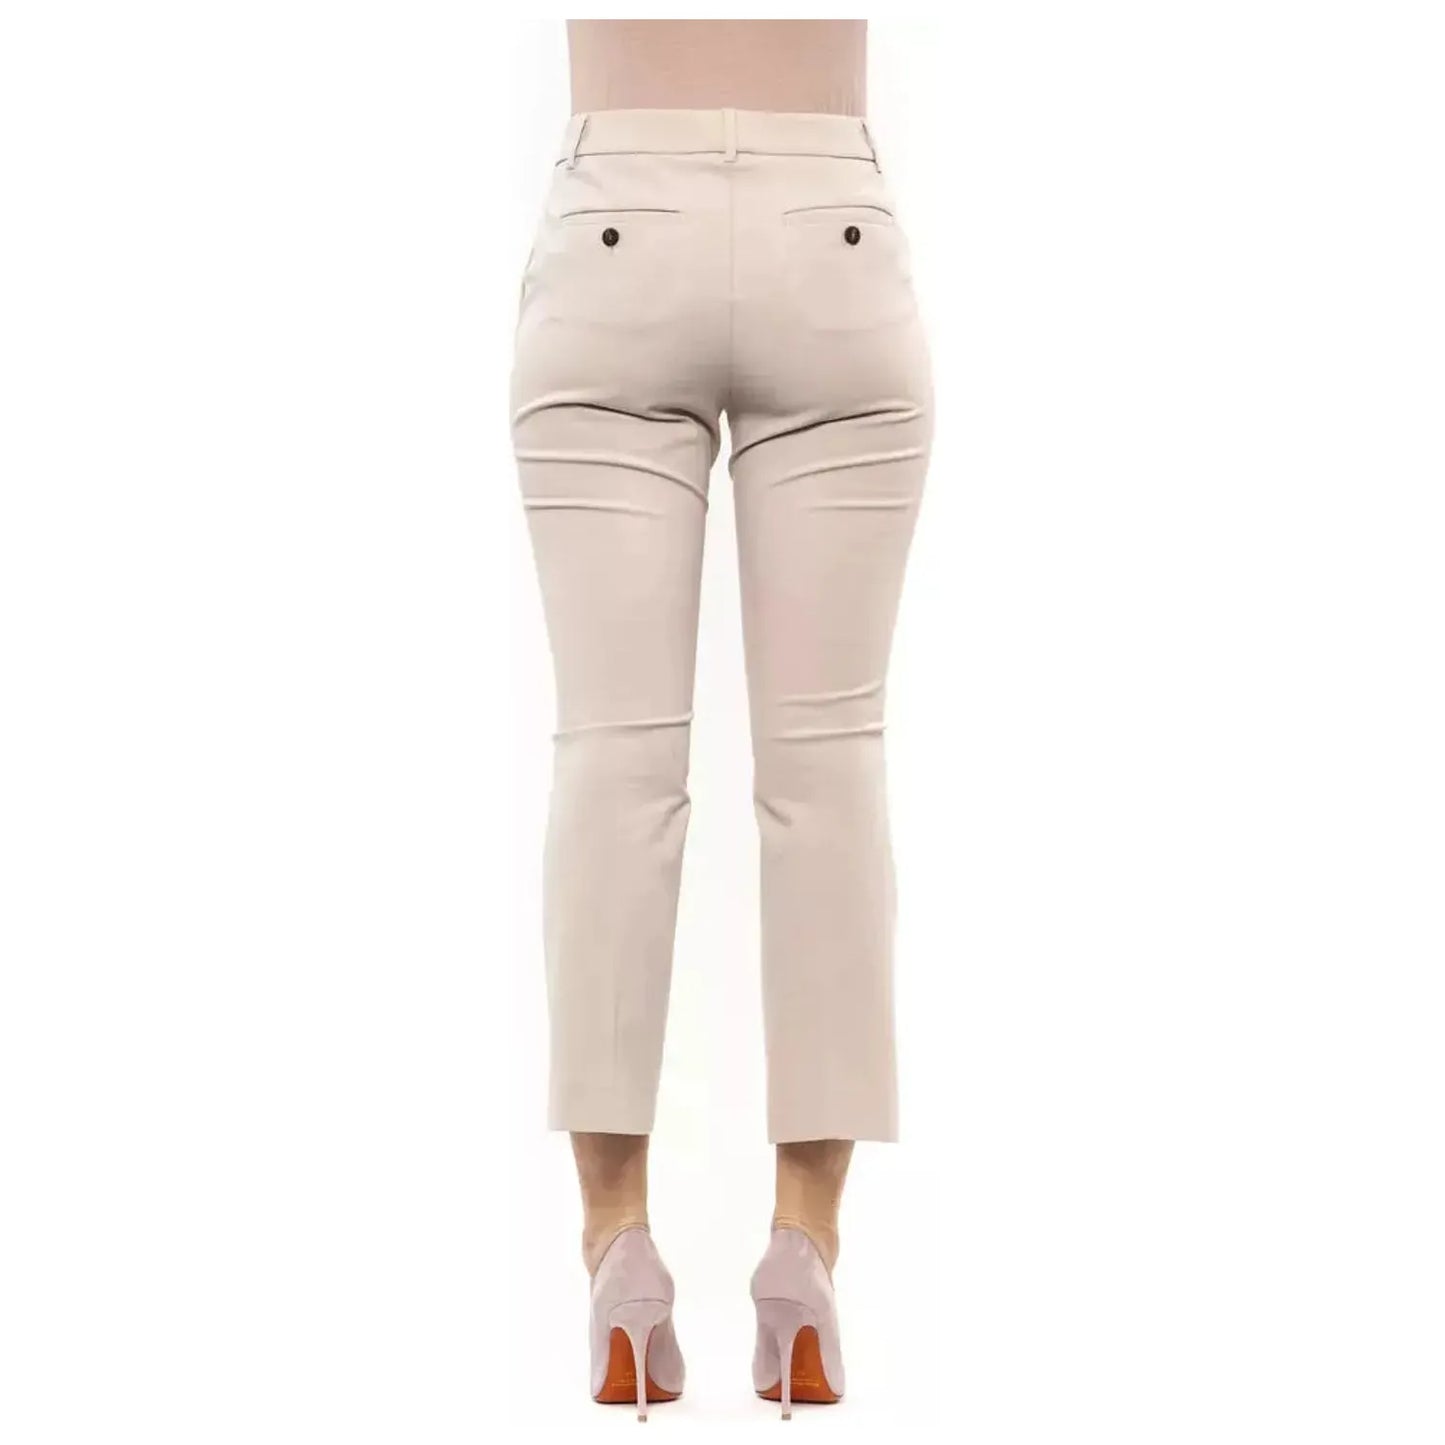 Peserico Elegant Beige Stretch Slim Trousers beige-jeans-pant-58 Jeans & Pants stock_product_image_20526_1377631528-16-79eb3be0-399.webp